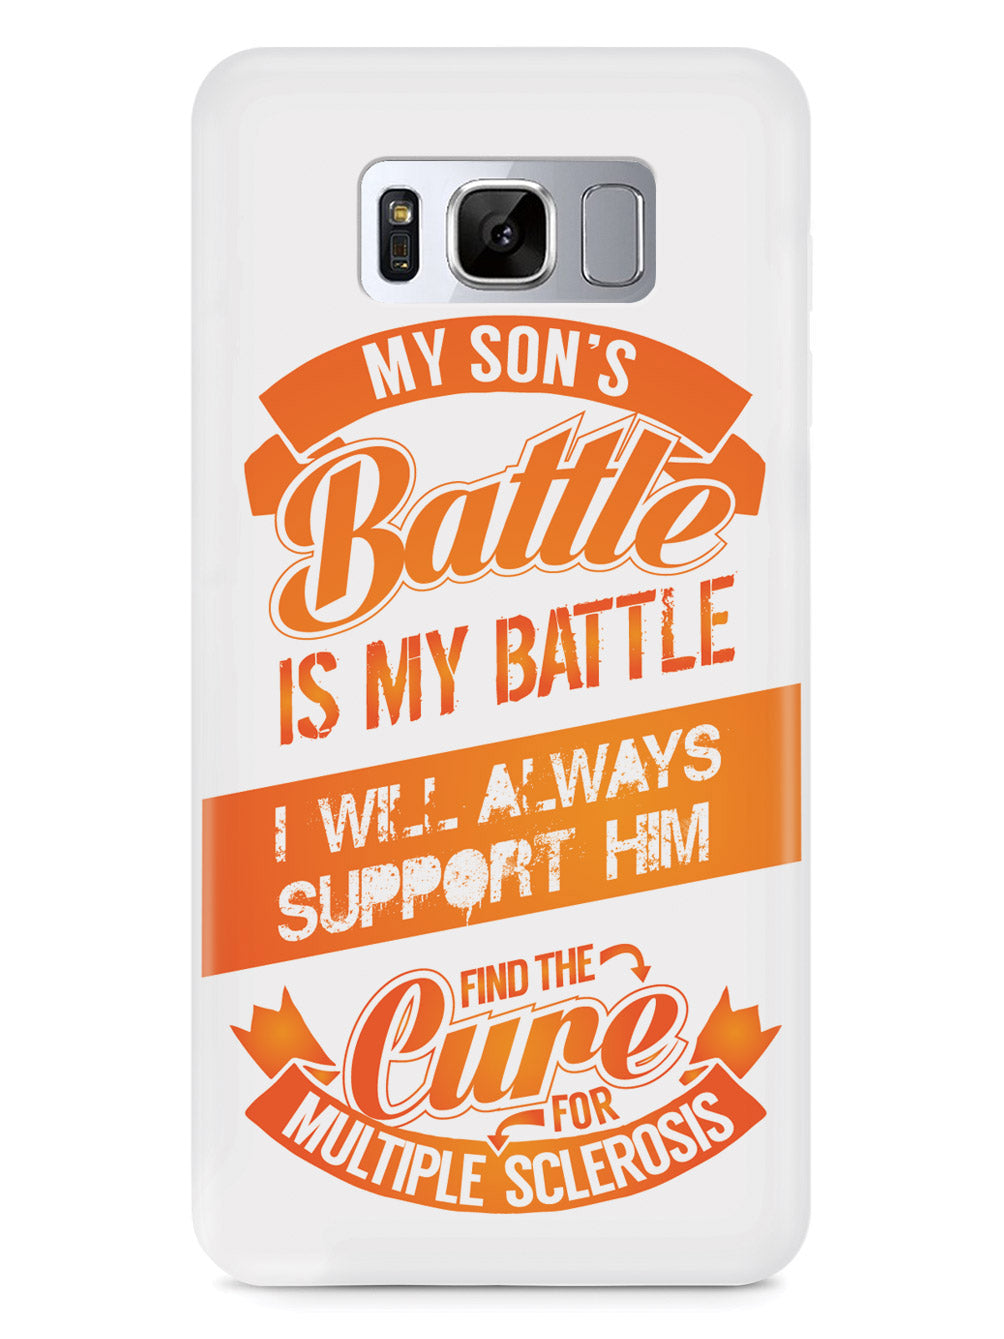 My Son's Battle - Multiple Sclerosis Awareness/Support Case